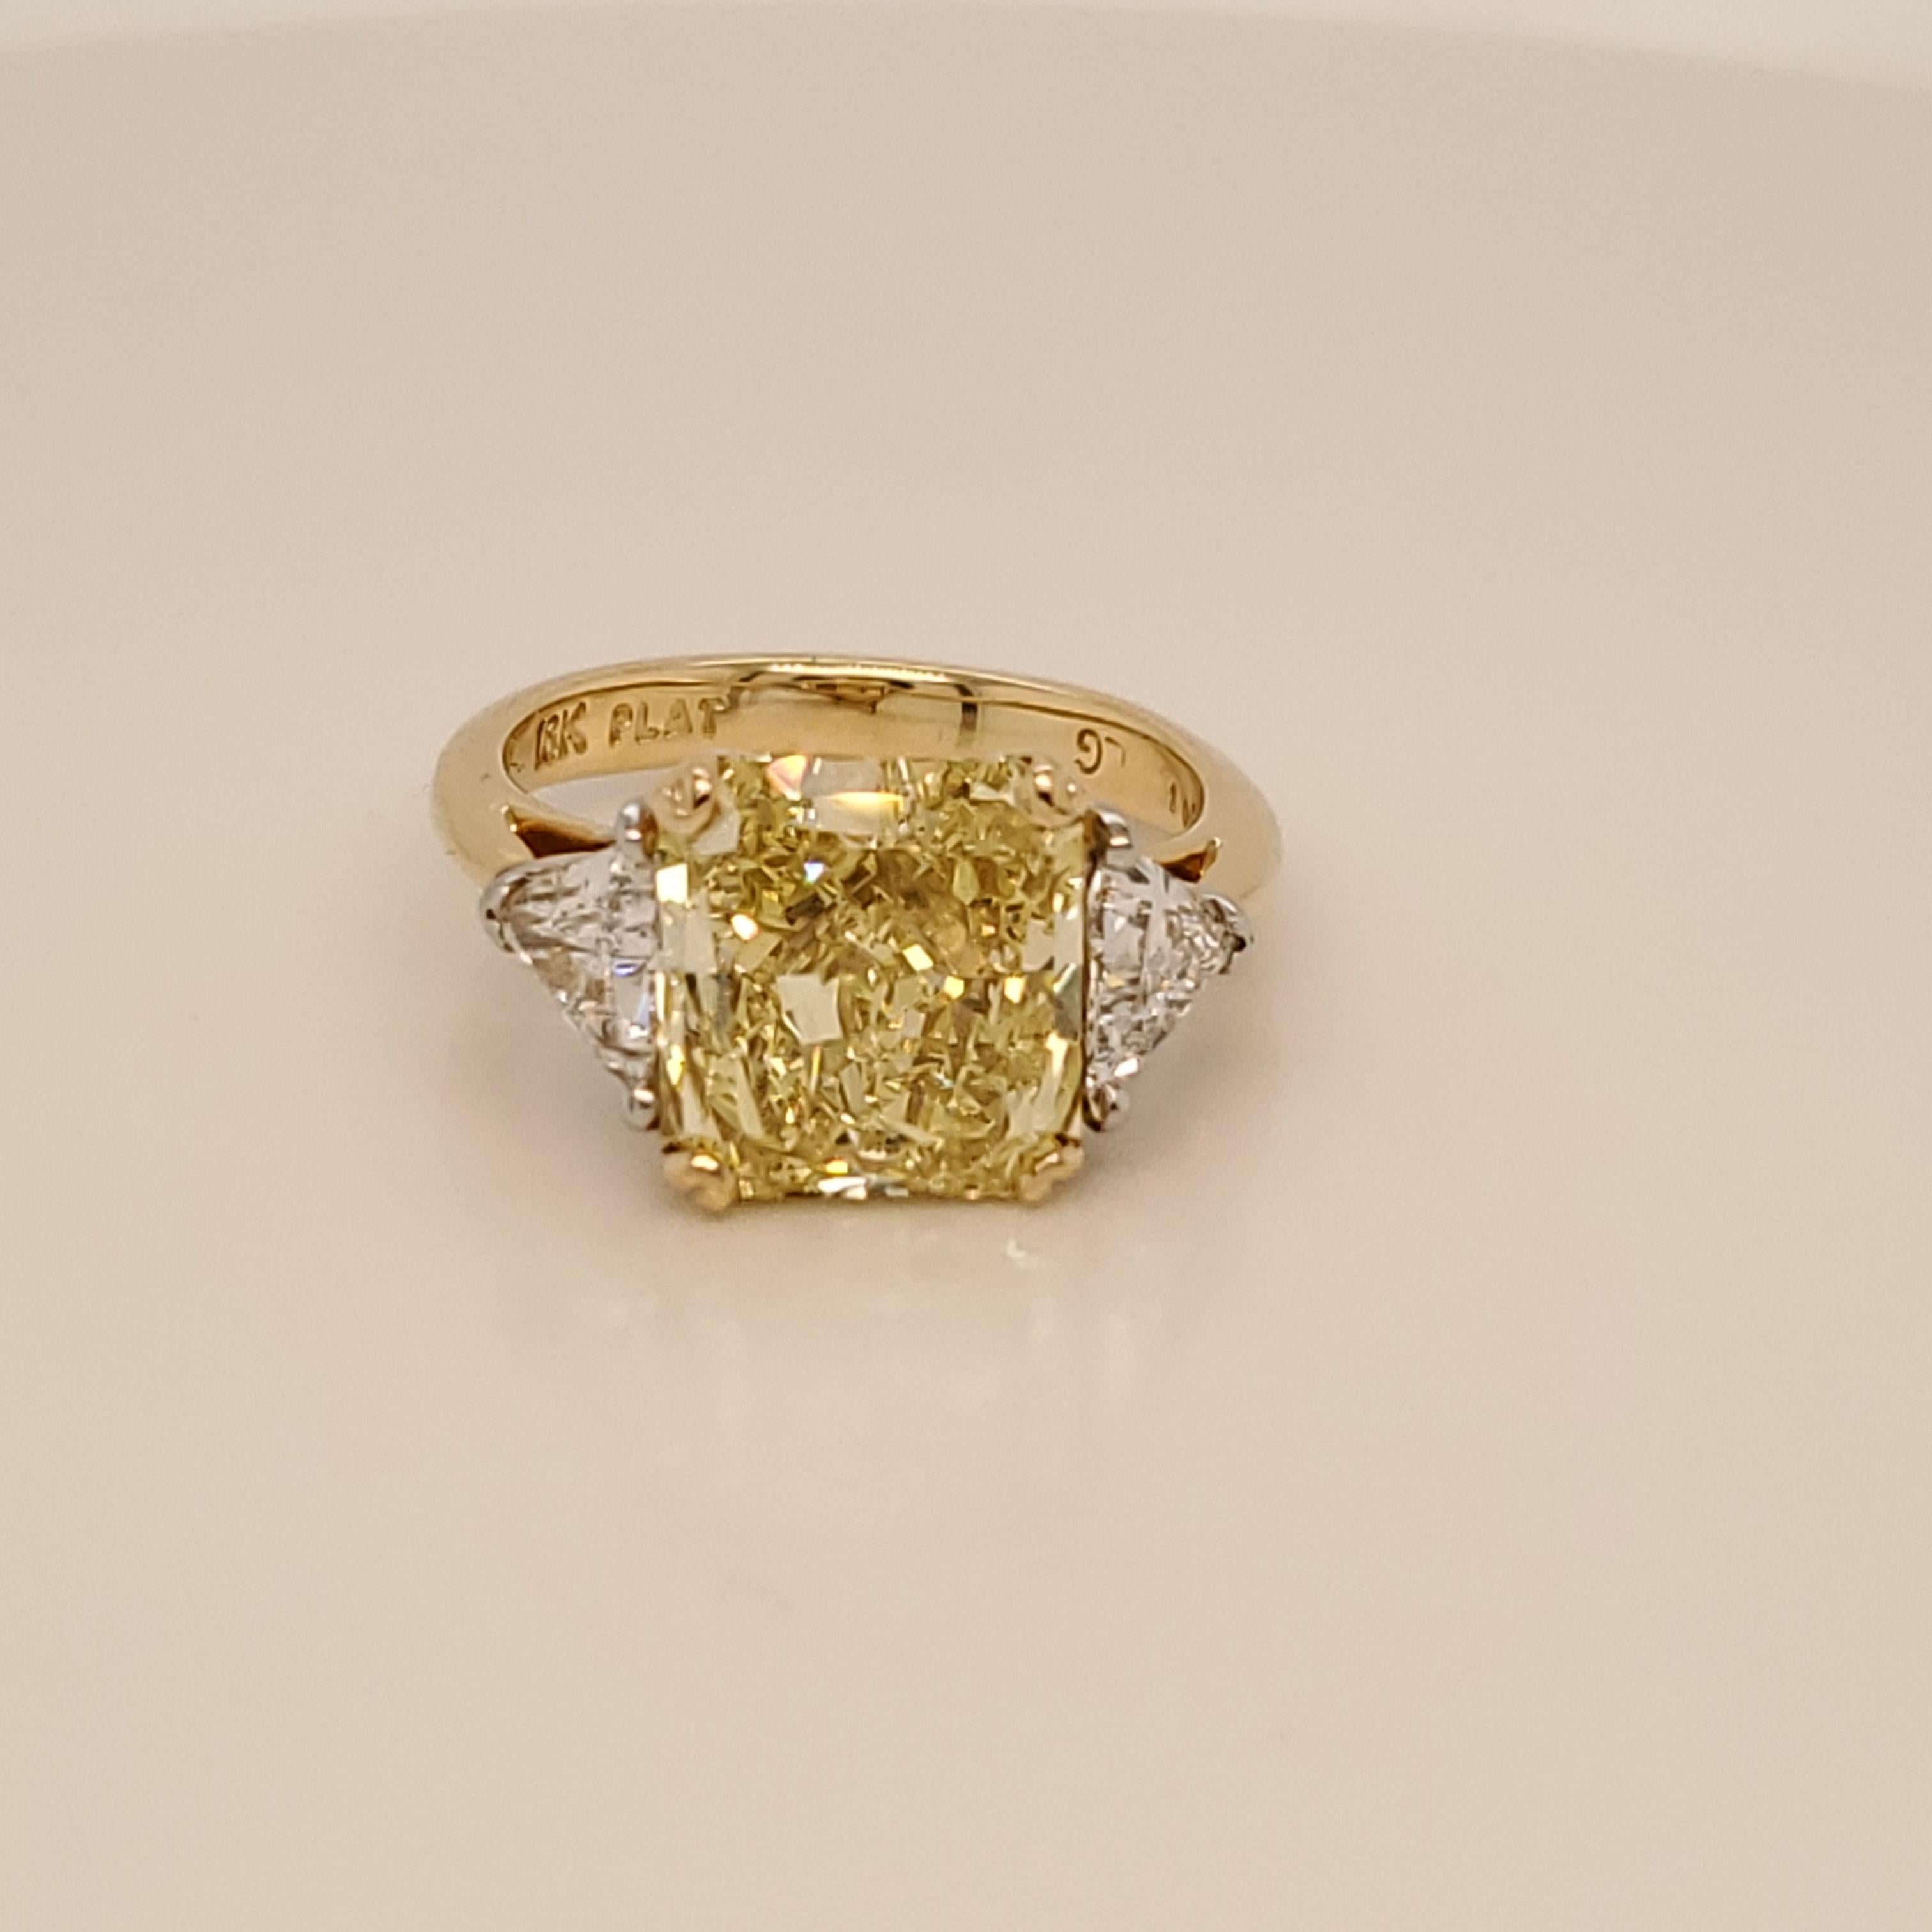 GIA Certified canary Three Stone Ring. The center stone is a Radiant cut Fancy Intense Yellow and SI1 Clarity. The two side stones are triangular shaped diamonds weighing 0.93 carats total. G color and SI1 clarity. The ring is made up of platinum